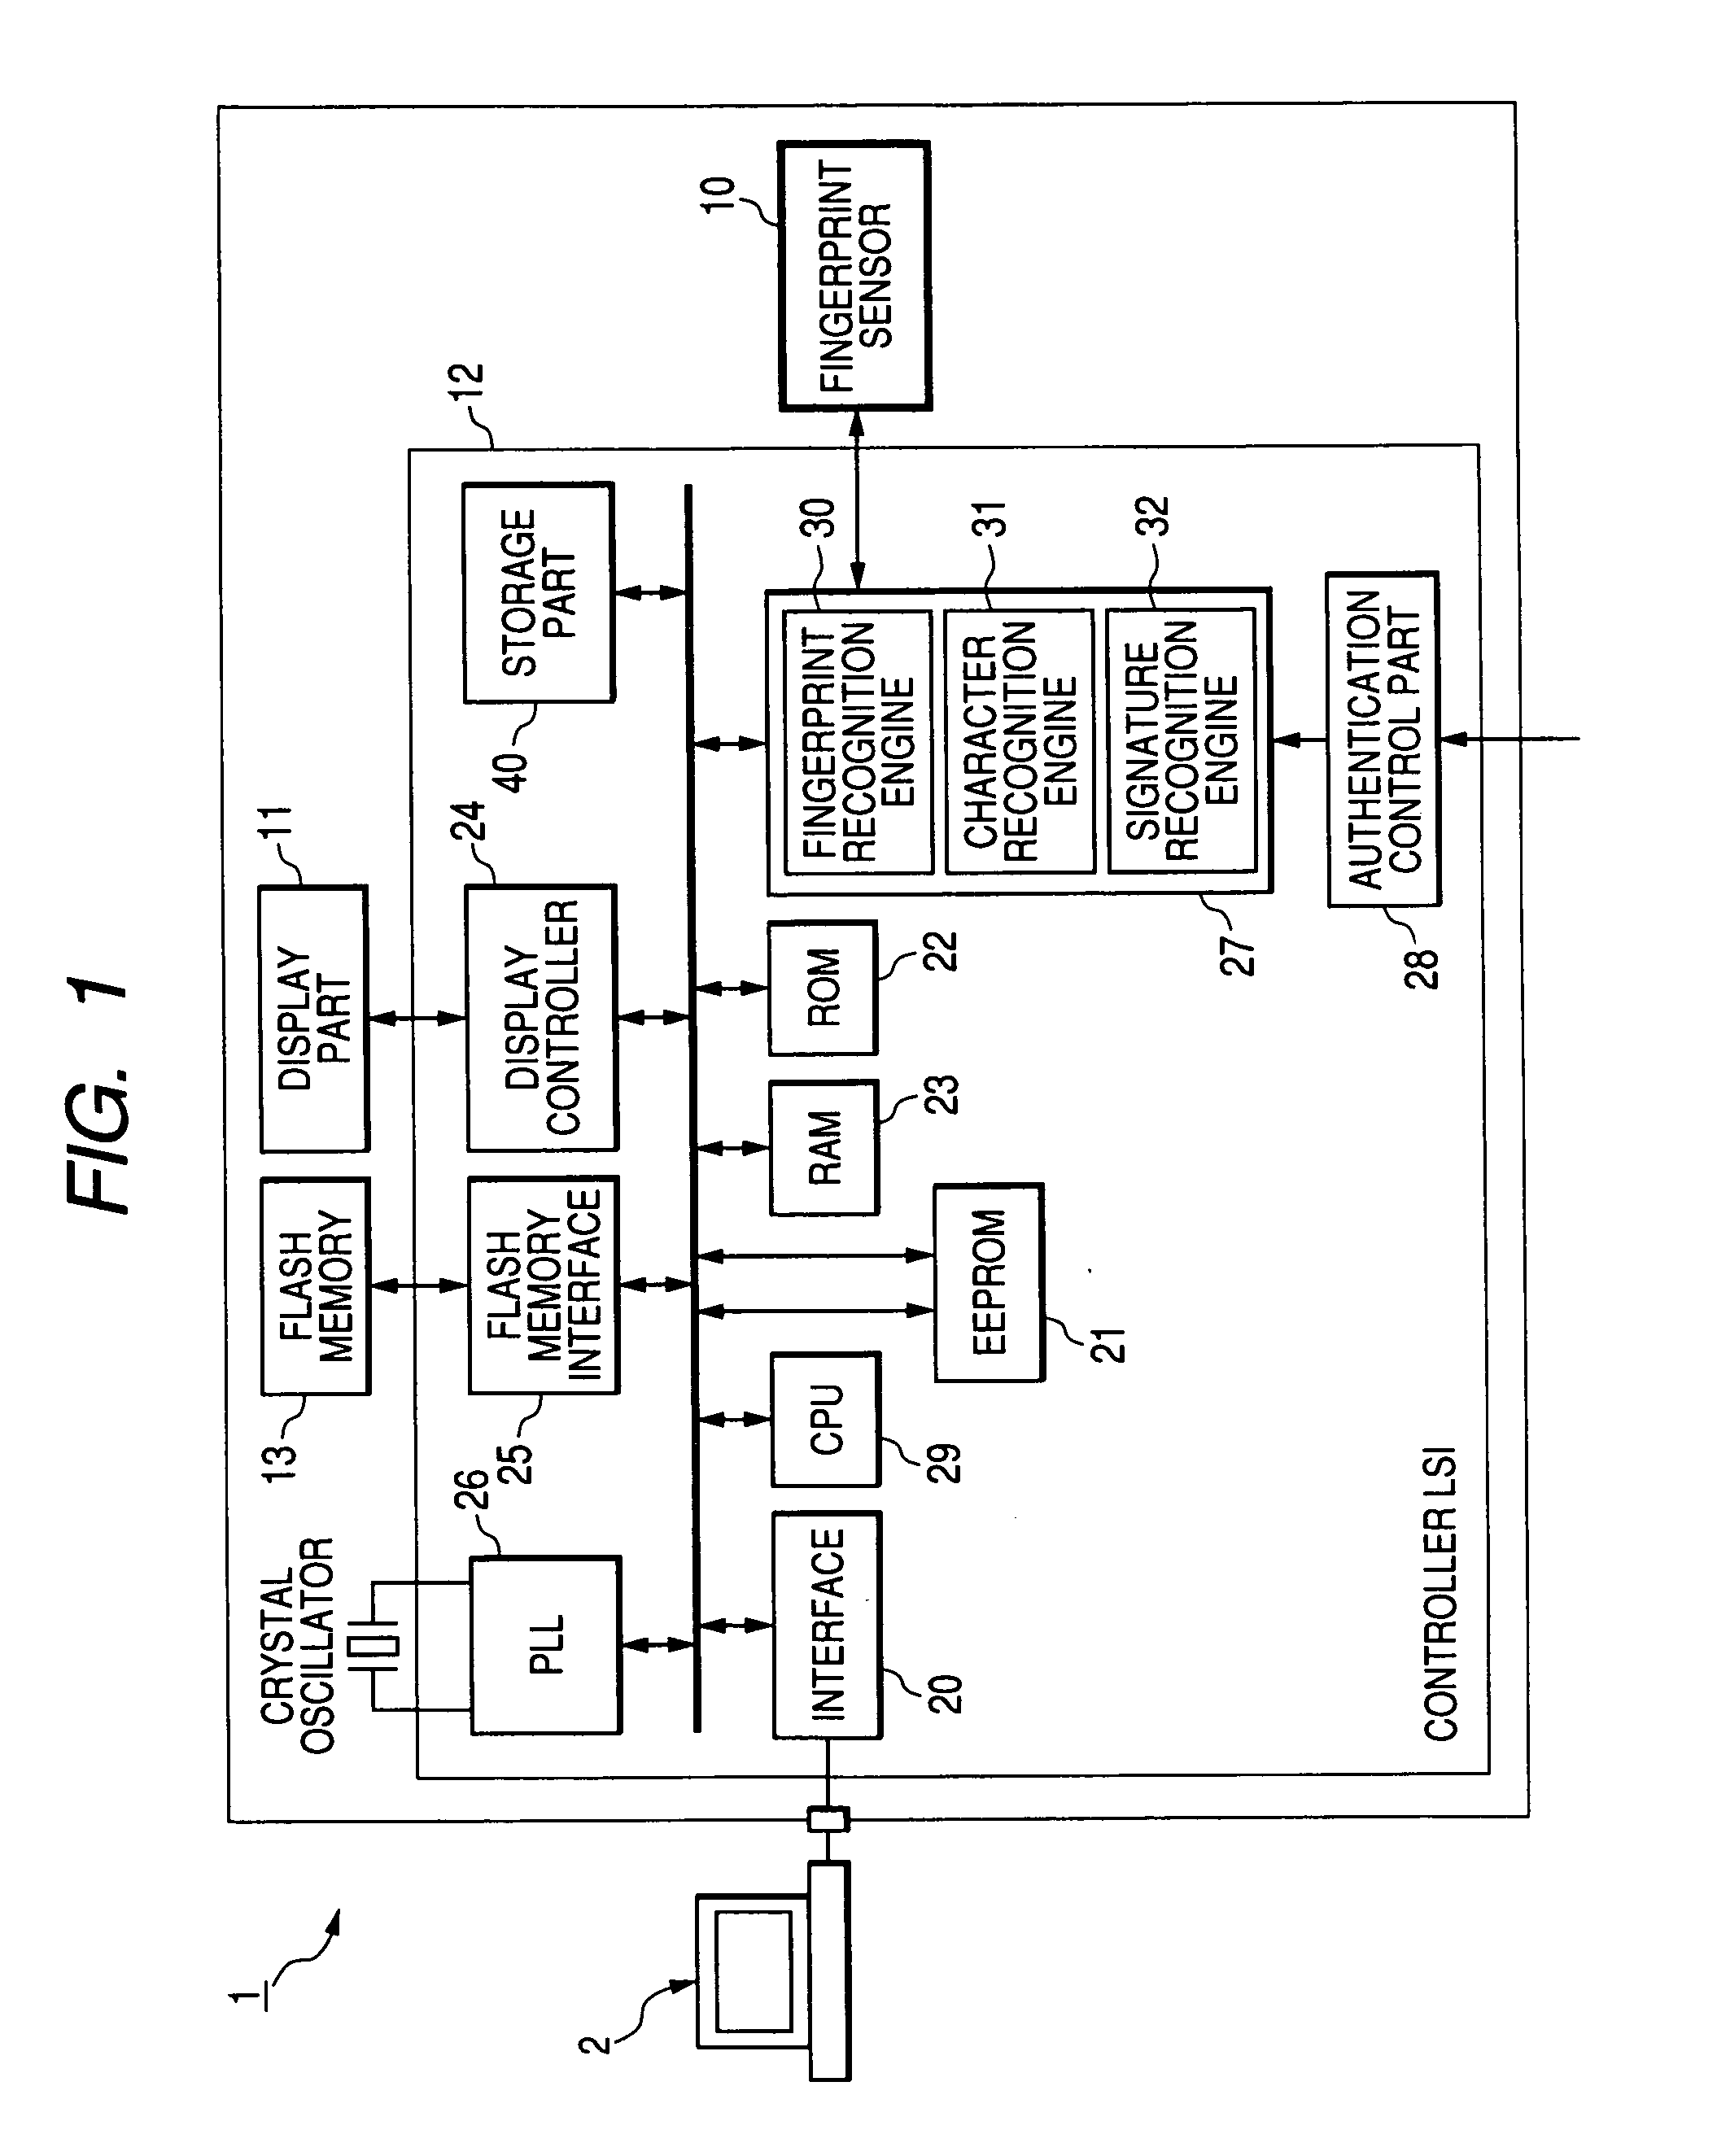 Removable storage device and authentication method